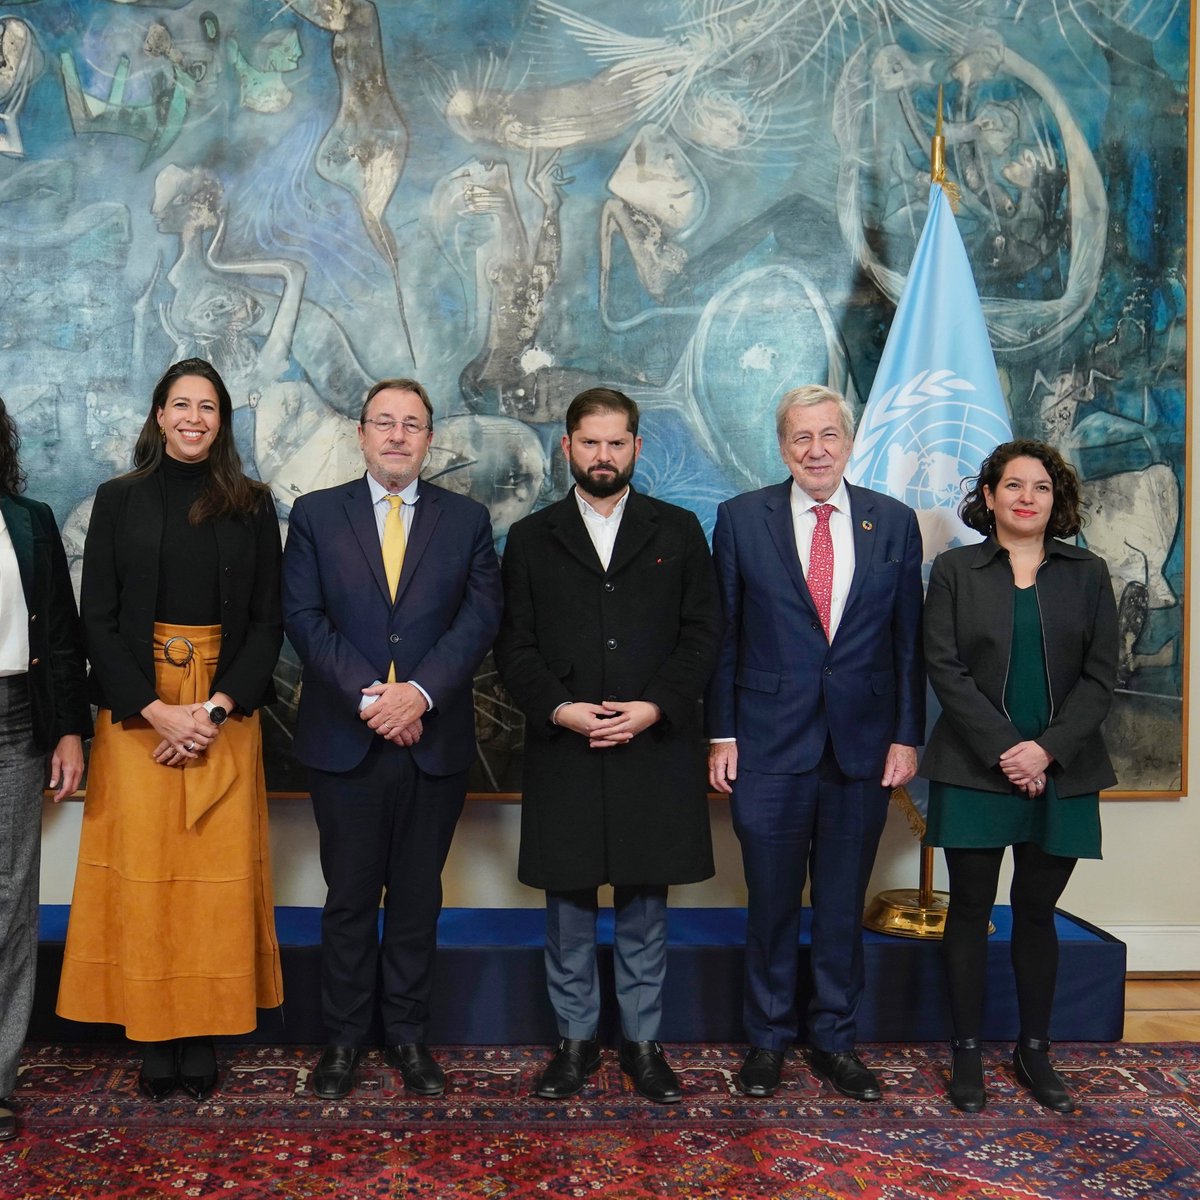 A great pleasure to meet again with President @GabrielBoric 🇨🇱 & Ministers of Foreign Affairs & Development. An excellent exchange on @UNDP-Chile collaboration and the forthcoming @PNUDChile #HumanDevelopmentReport with an exciting look at Chile’s sustainable development future